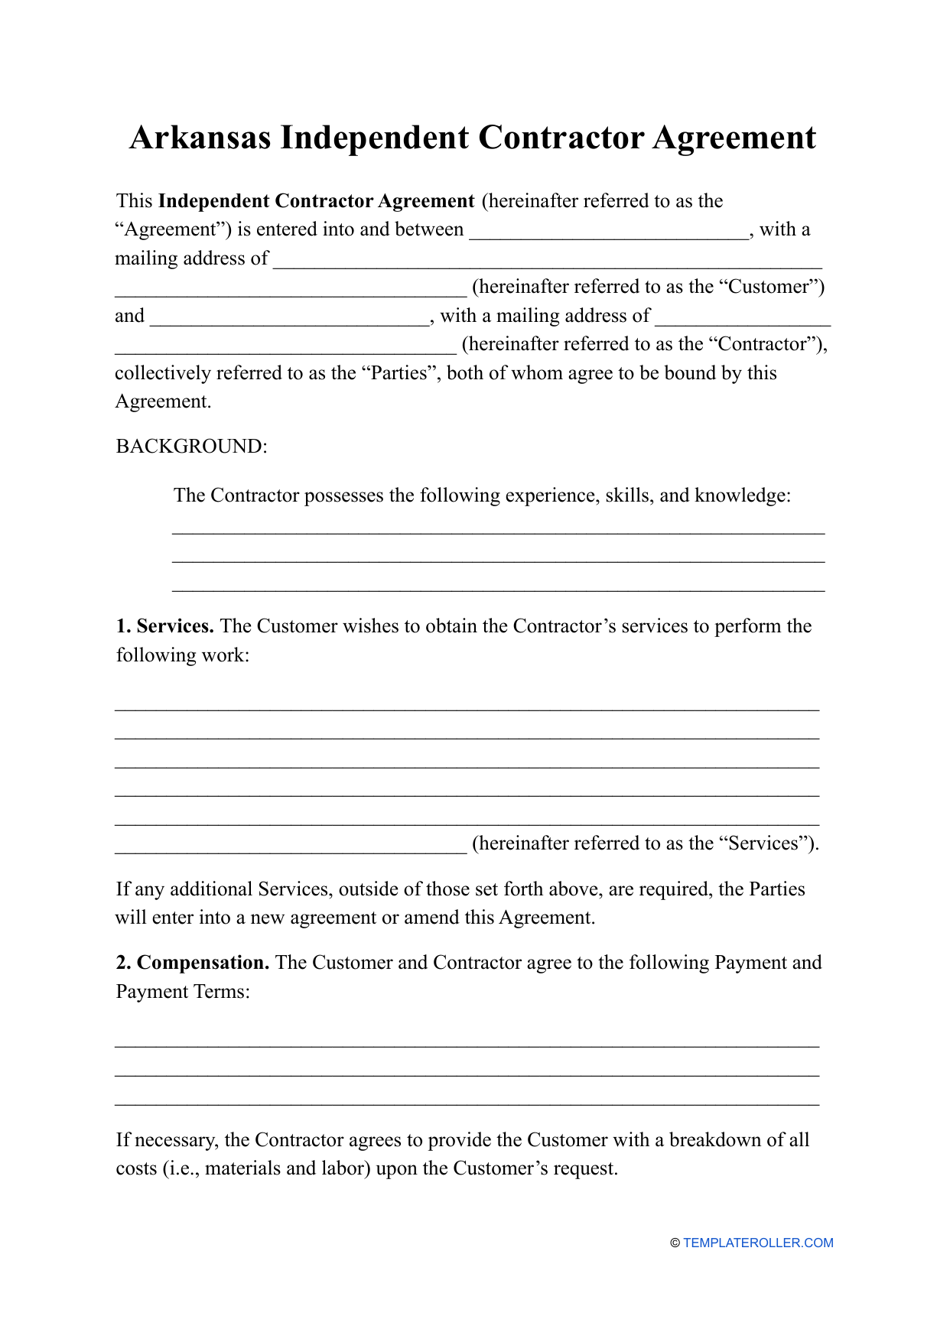 Independent Contractor Agreement Template - Arkansas, Page 1